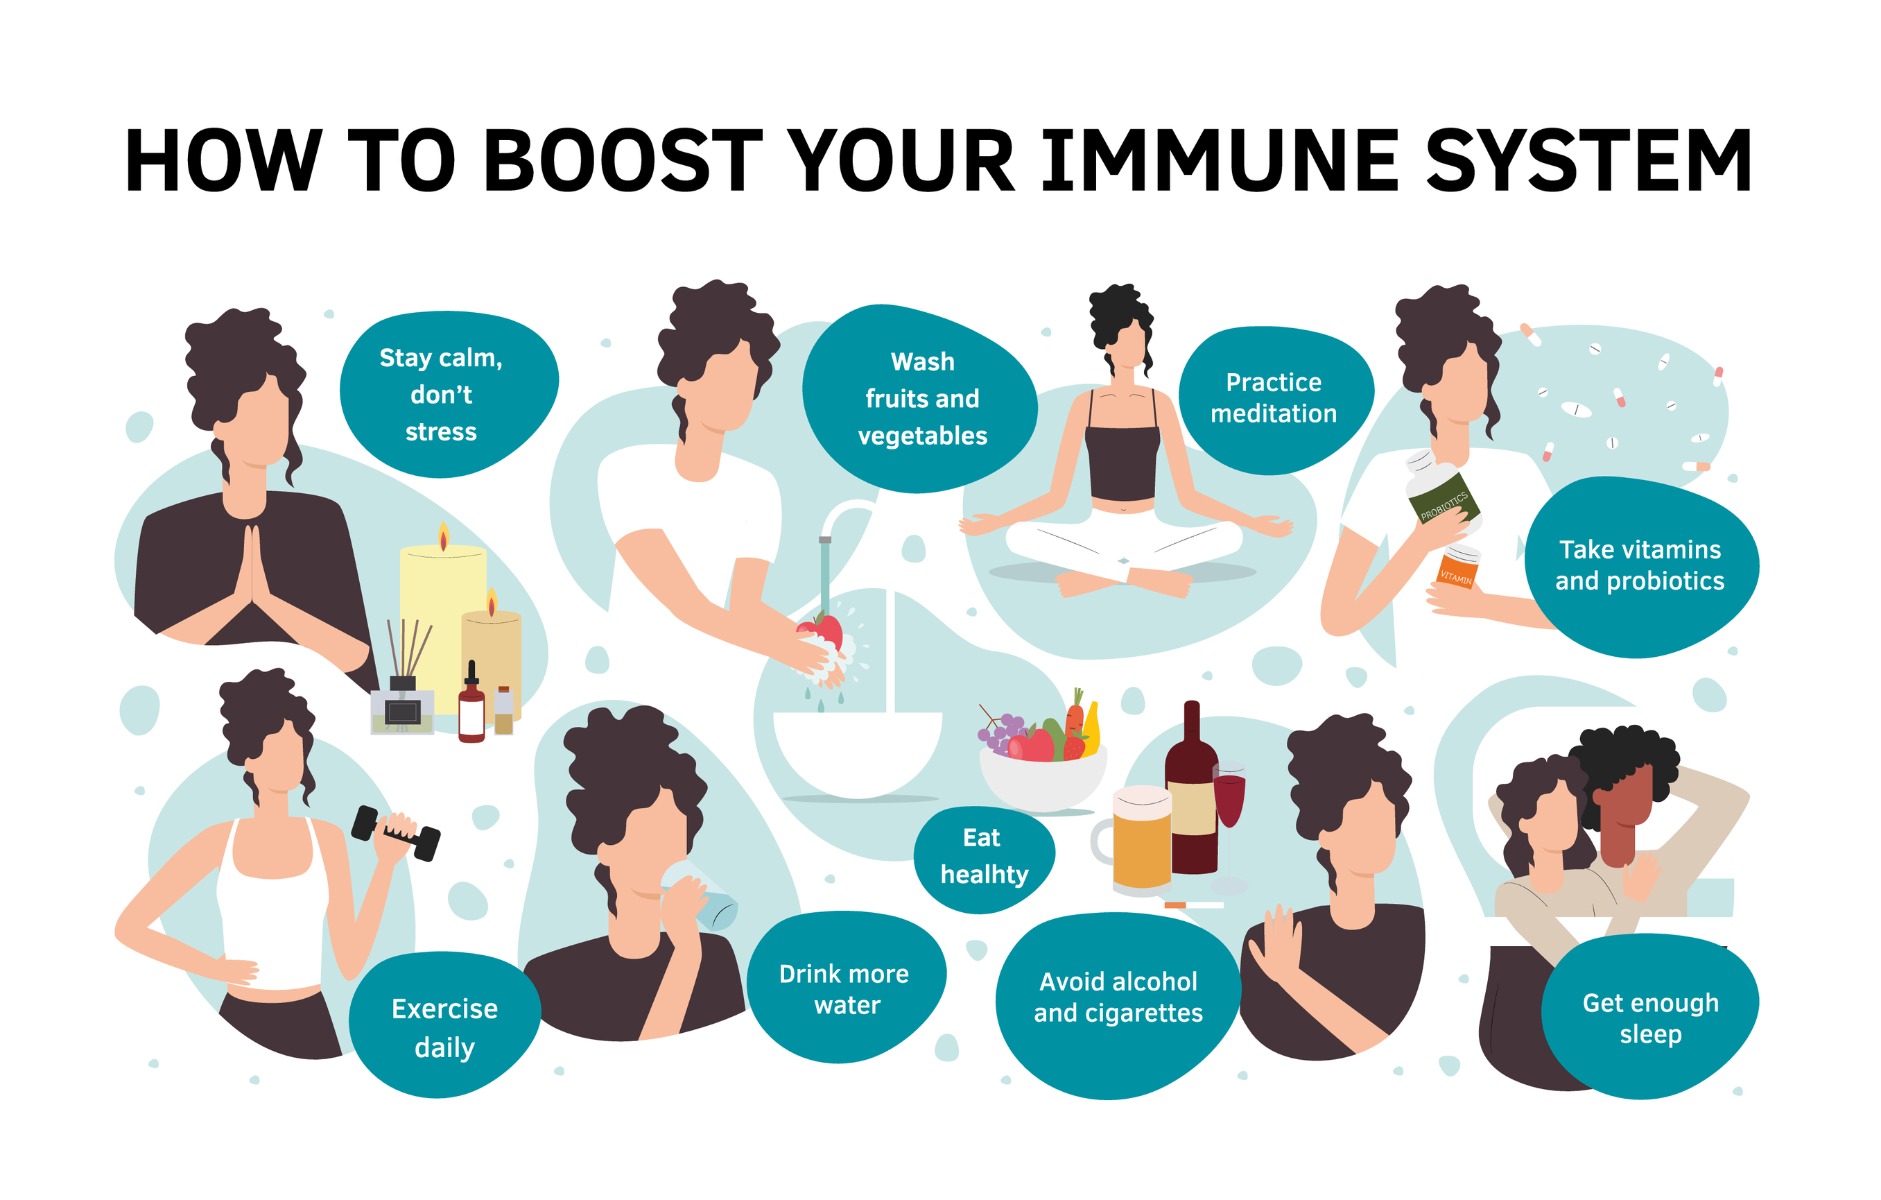 How to Boost Your Immune System Infographic